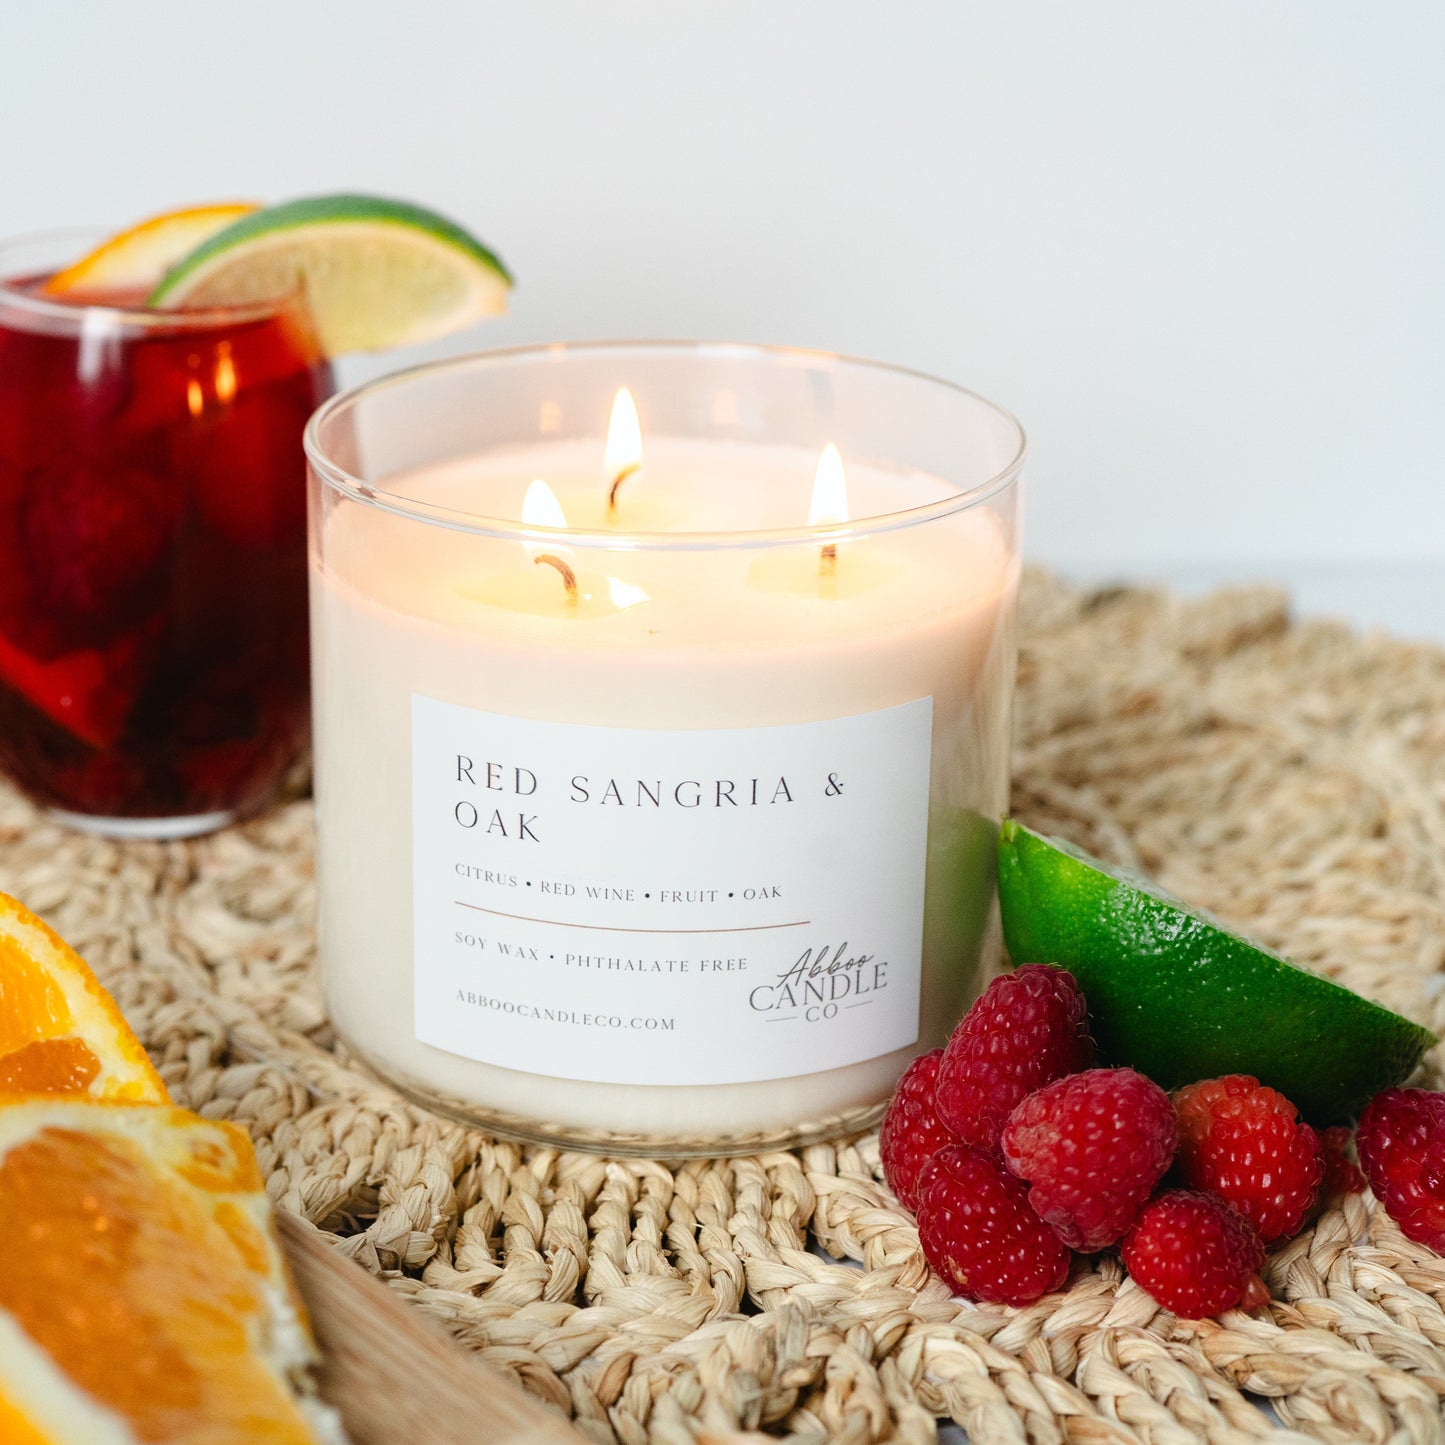 Red Sangria and Oak 3-Wick Soy Candle - Abboo Candle Co® Wholesale